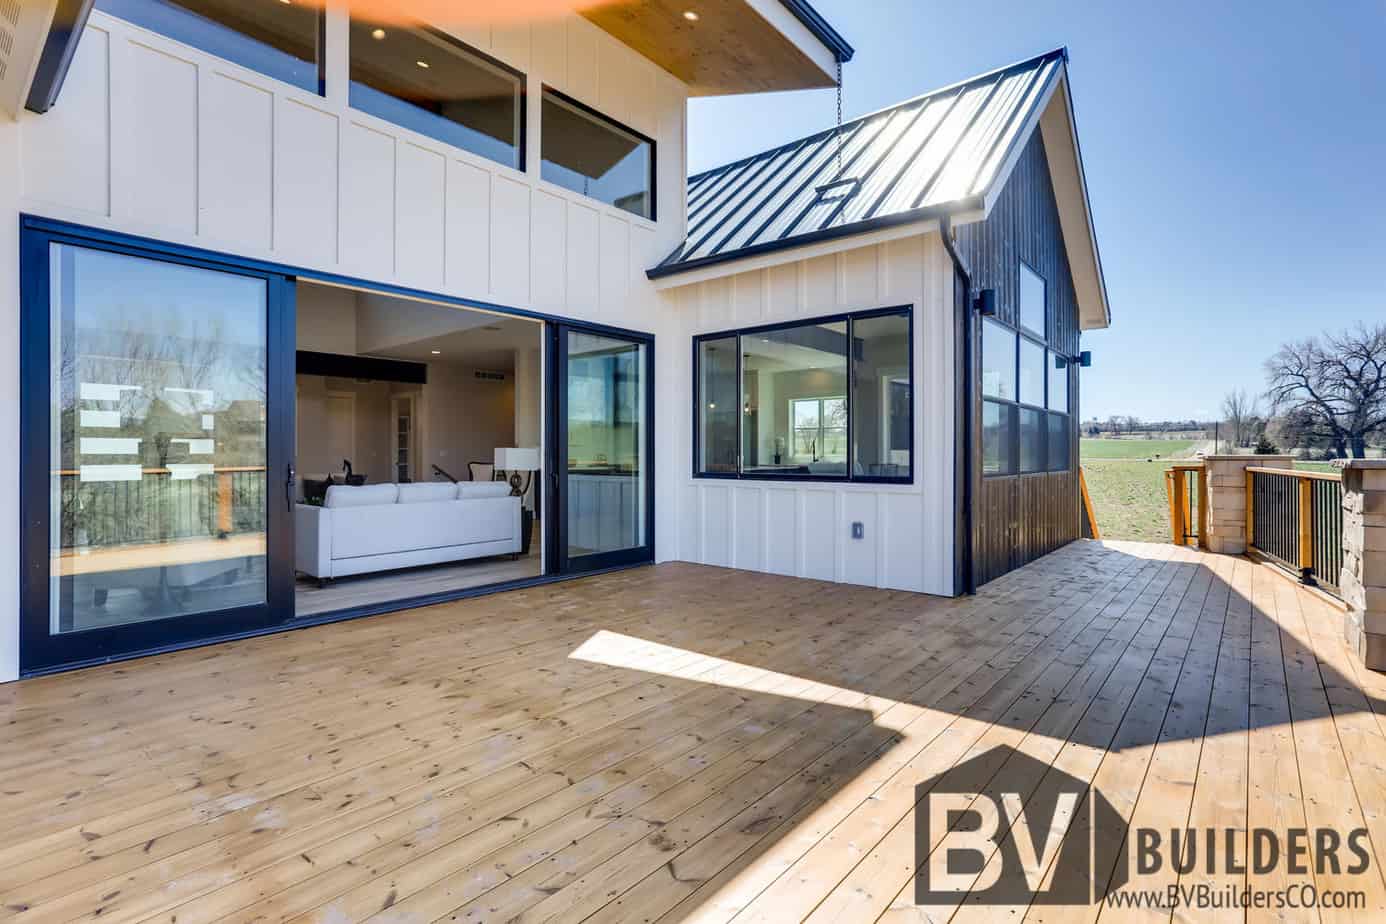 Modern farmhouse with Thermory wood deck and large sliding glass door